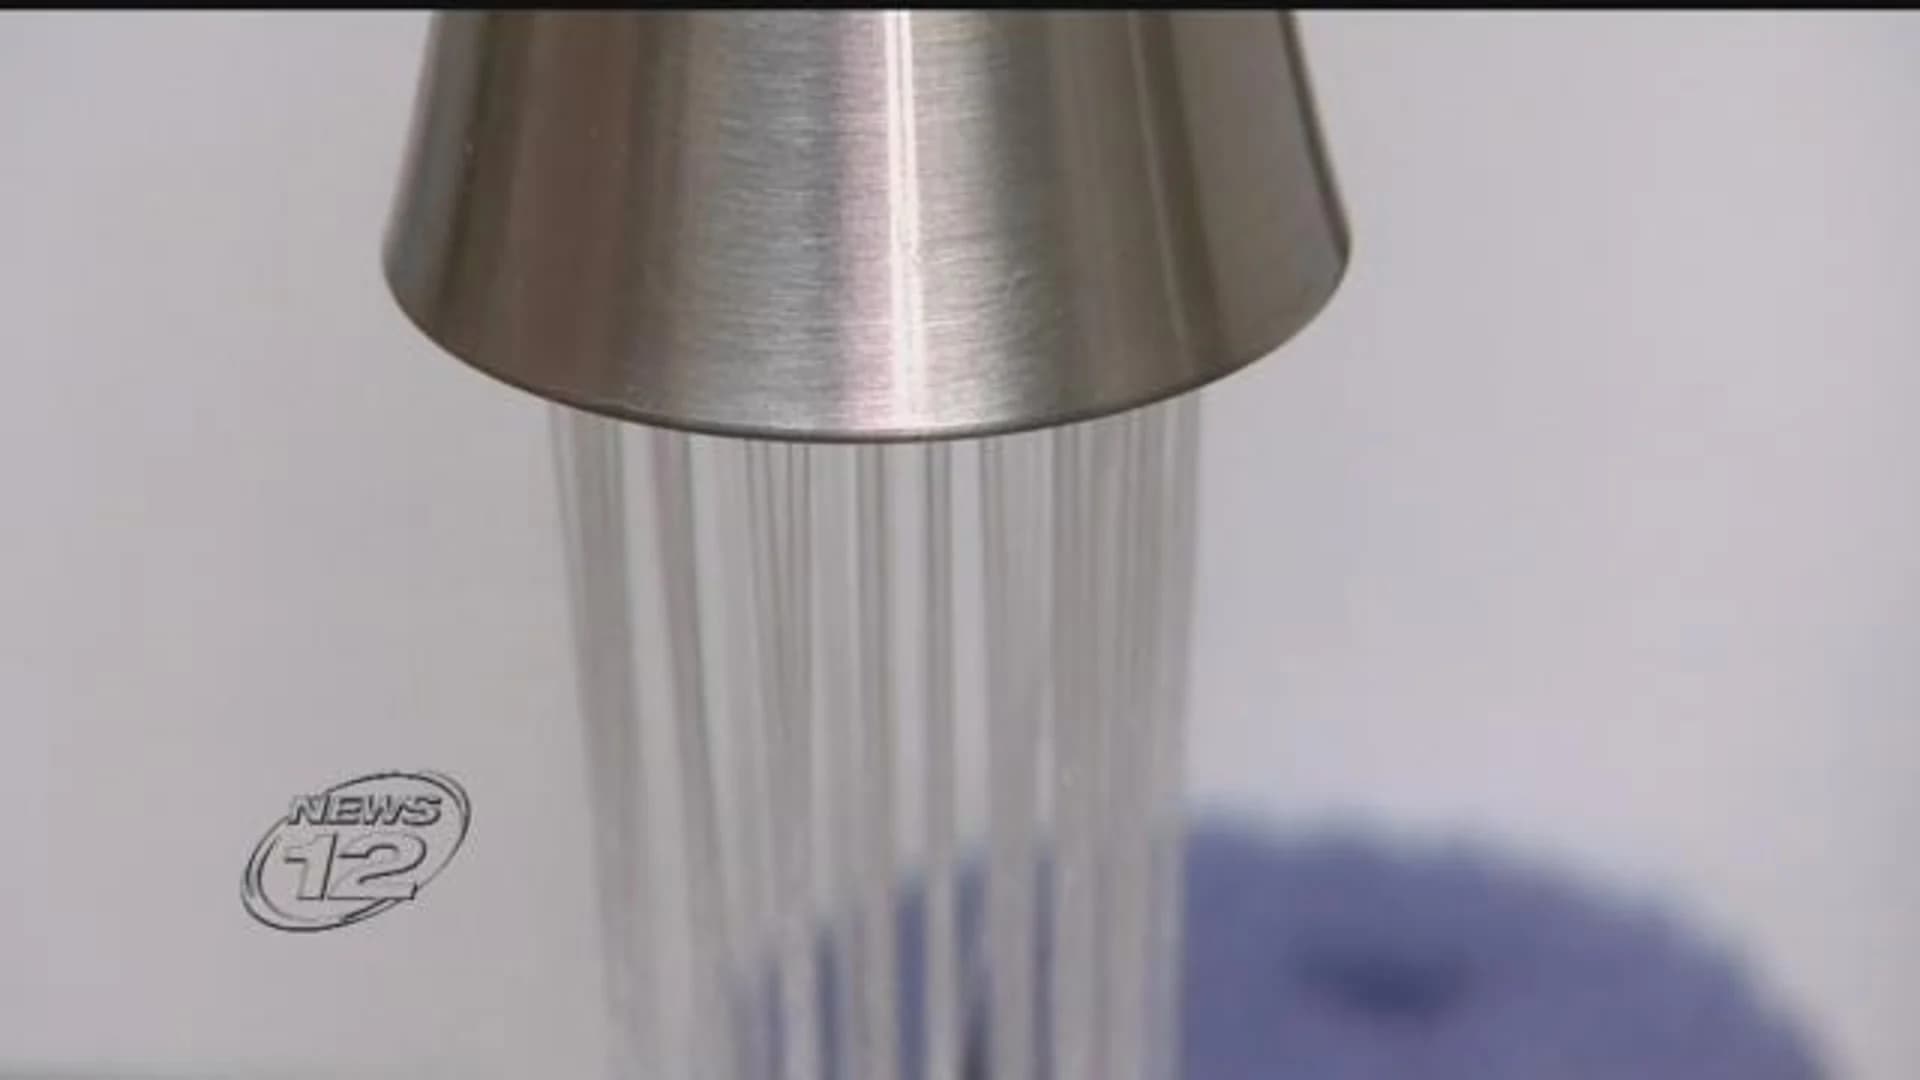 Suffolk water chief: 1,4-dioxane filters will come at ‘tremendous cost’